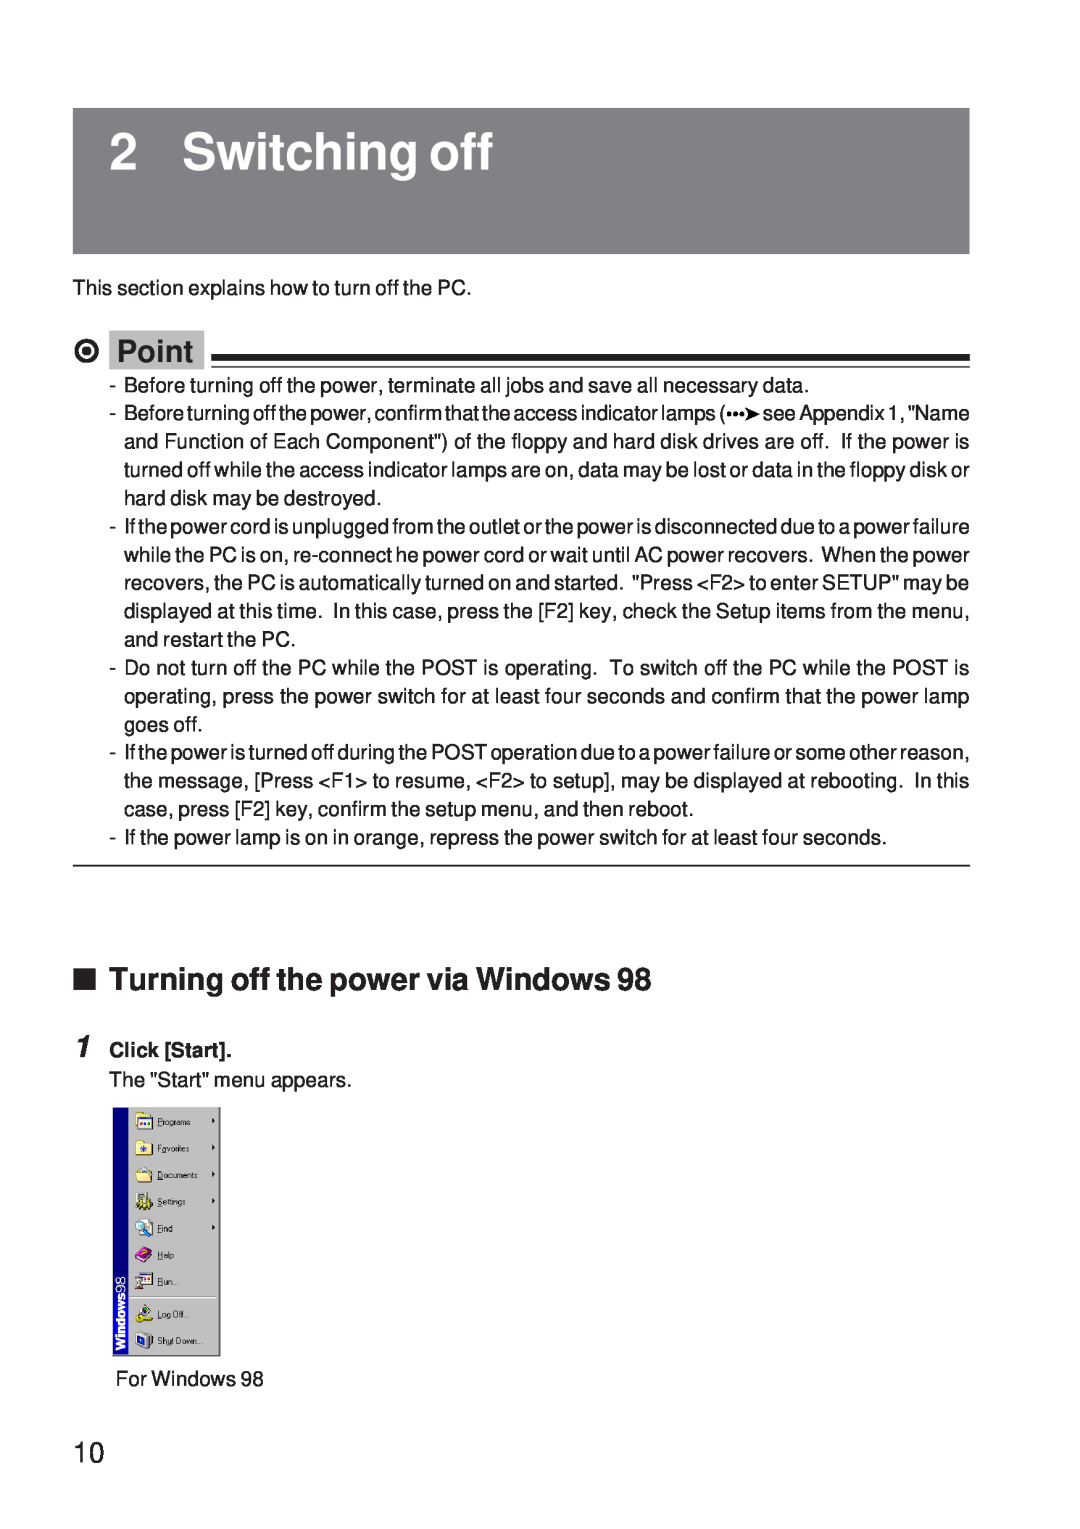 Fujitsu 5000 user manual Switching off, Turning off the power via Windows, Click Start, ⁄ Point 